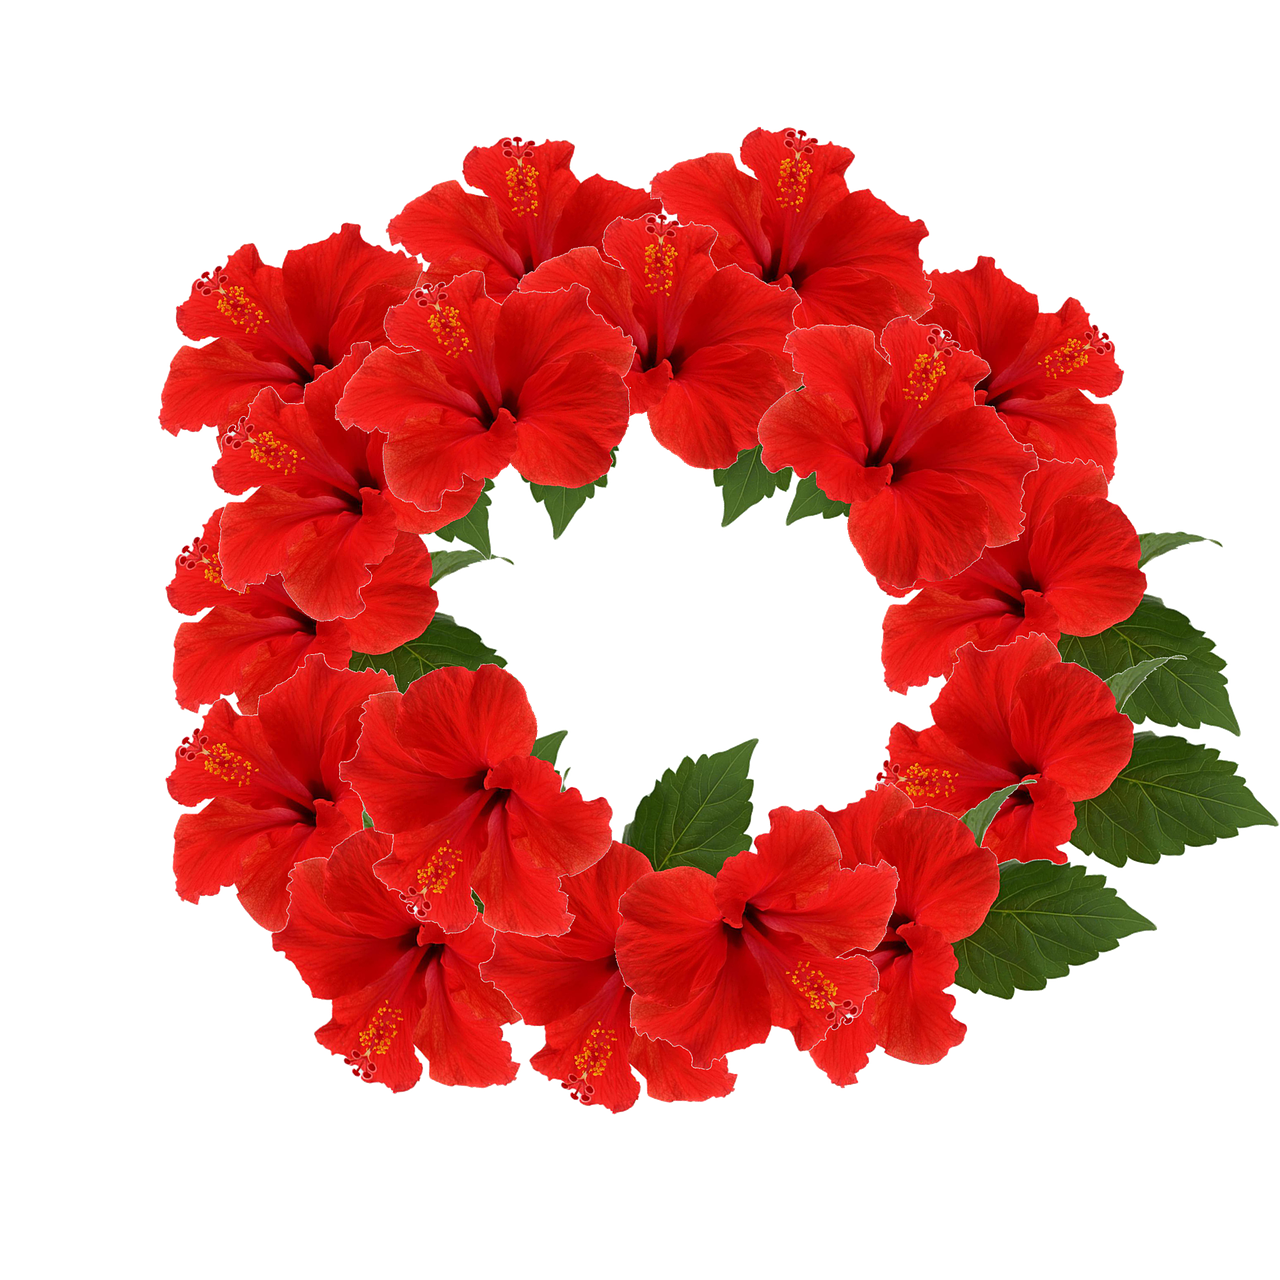 a wreath of red flowers on a black background, a digital rendering, hurufiyya, hibiscus flowers, ¯_(ツ)_/¯, image dataset, path traced